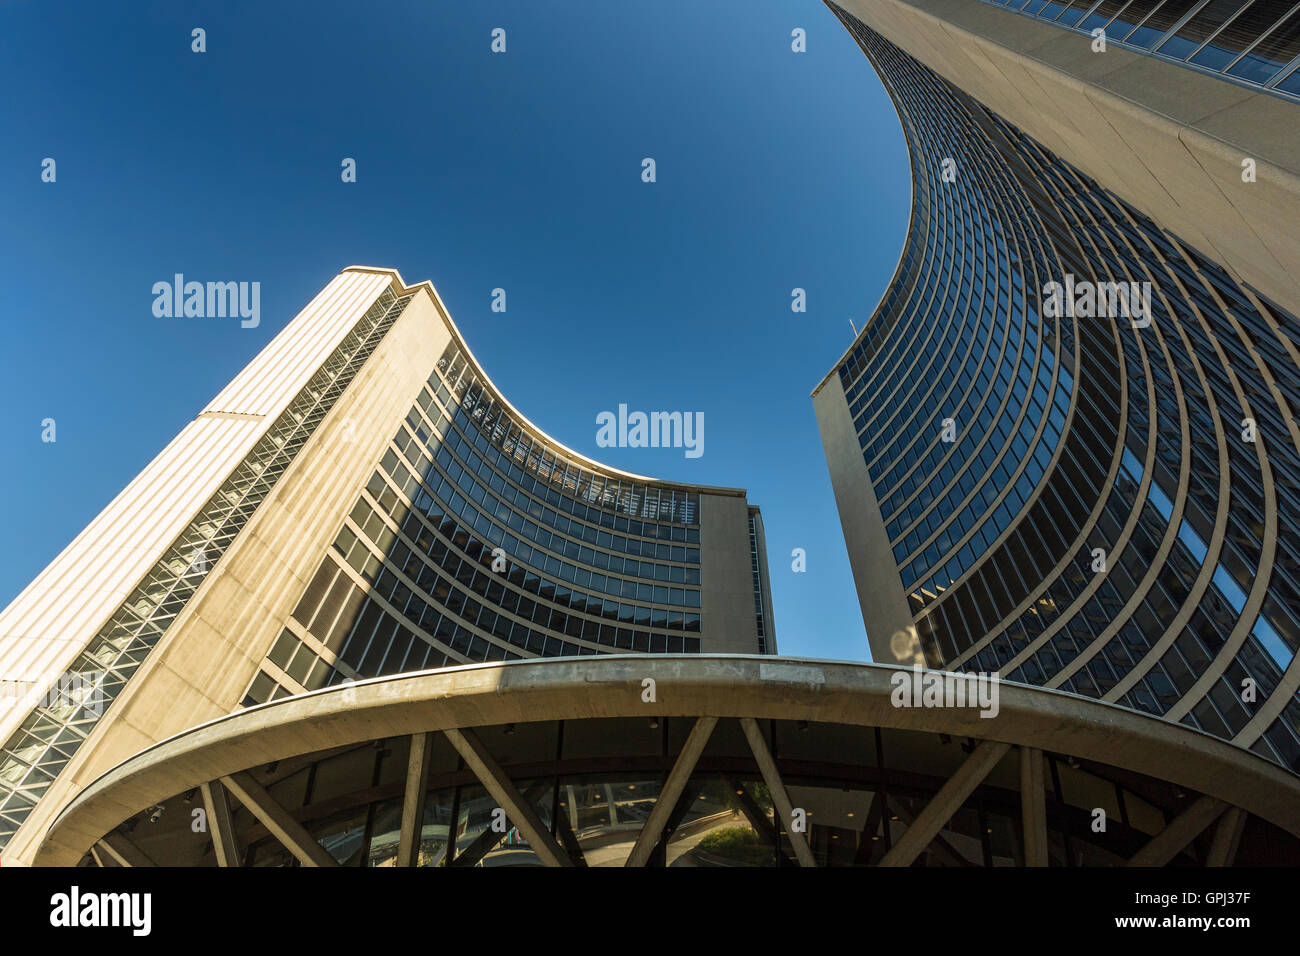 Toronto City Hall close up, taken from under the dome in Toronto, Ontario. Stock Photo